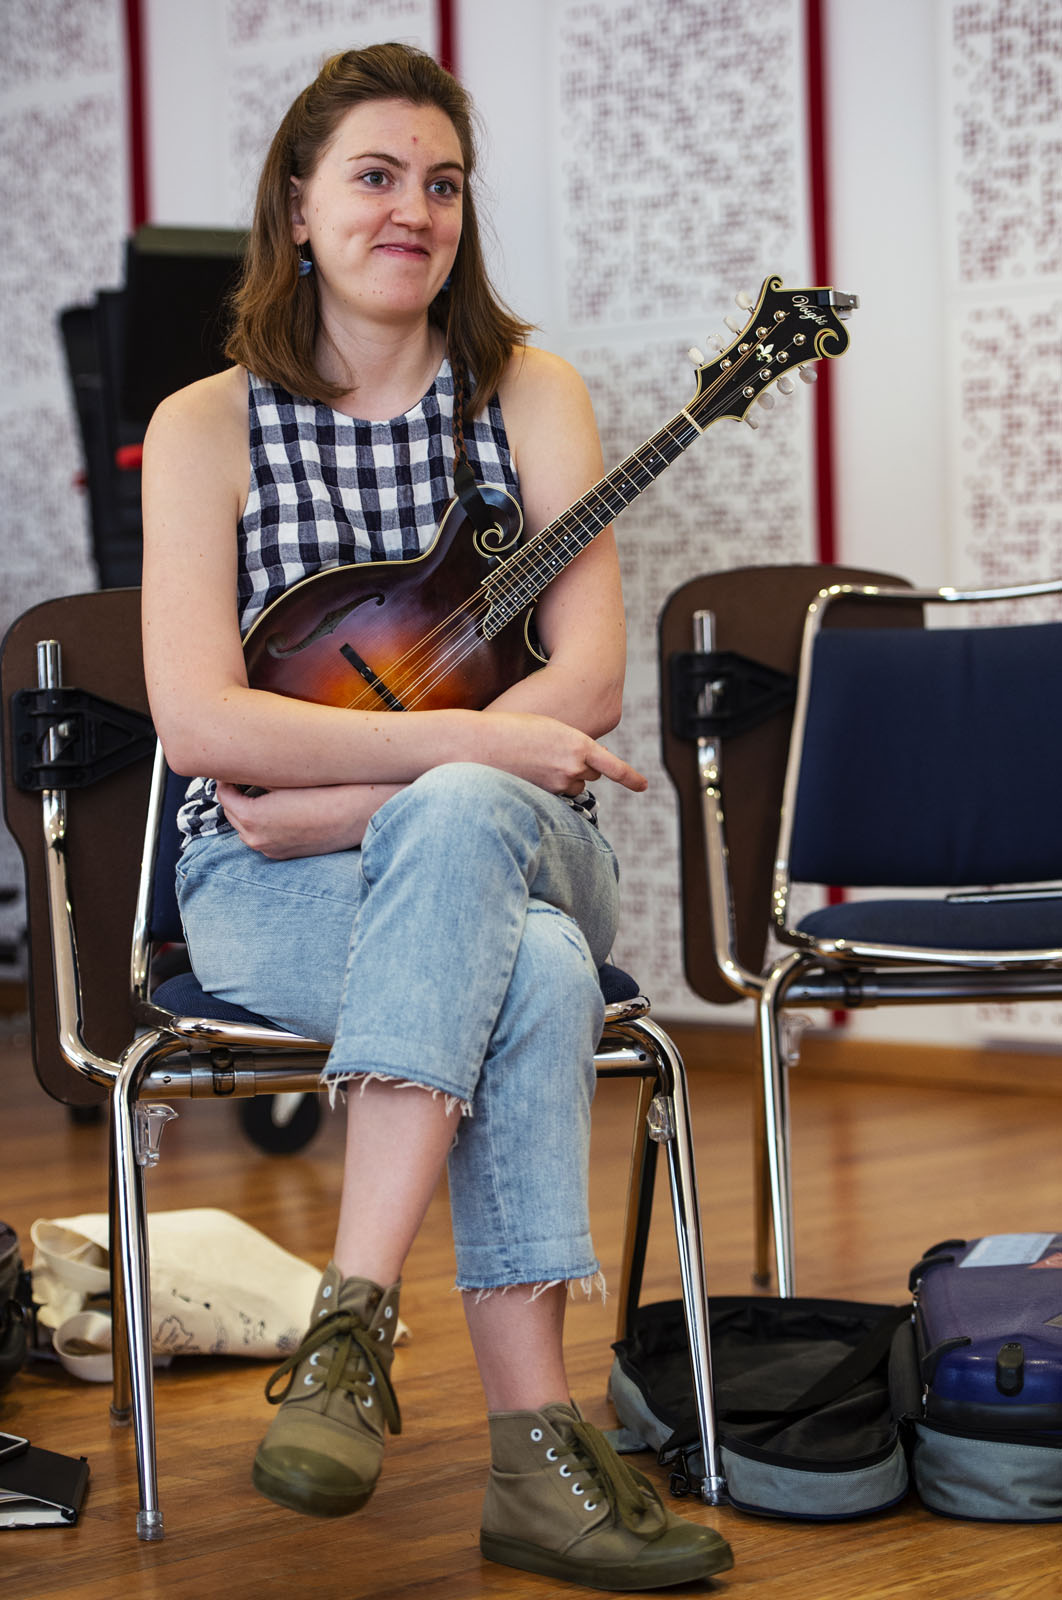 Nicole Pey ’15 holds her mandolin while listening to her instructor Sierra Hull speak during the Bluegrass Workshop in Packard Hall on June 26, 2018.